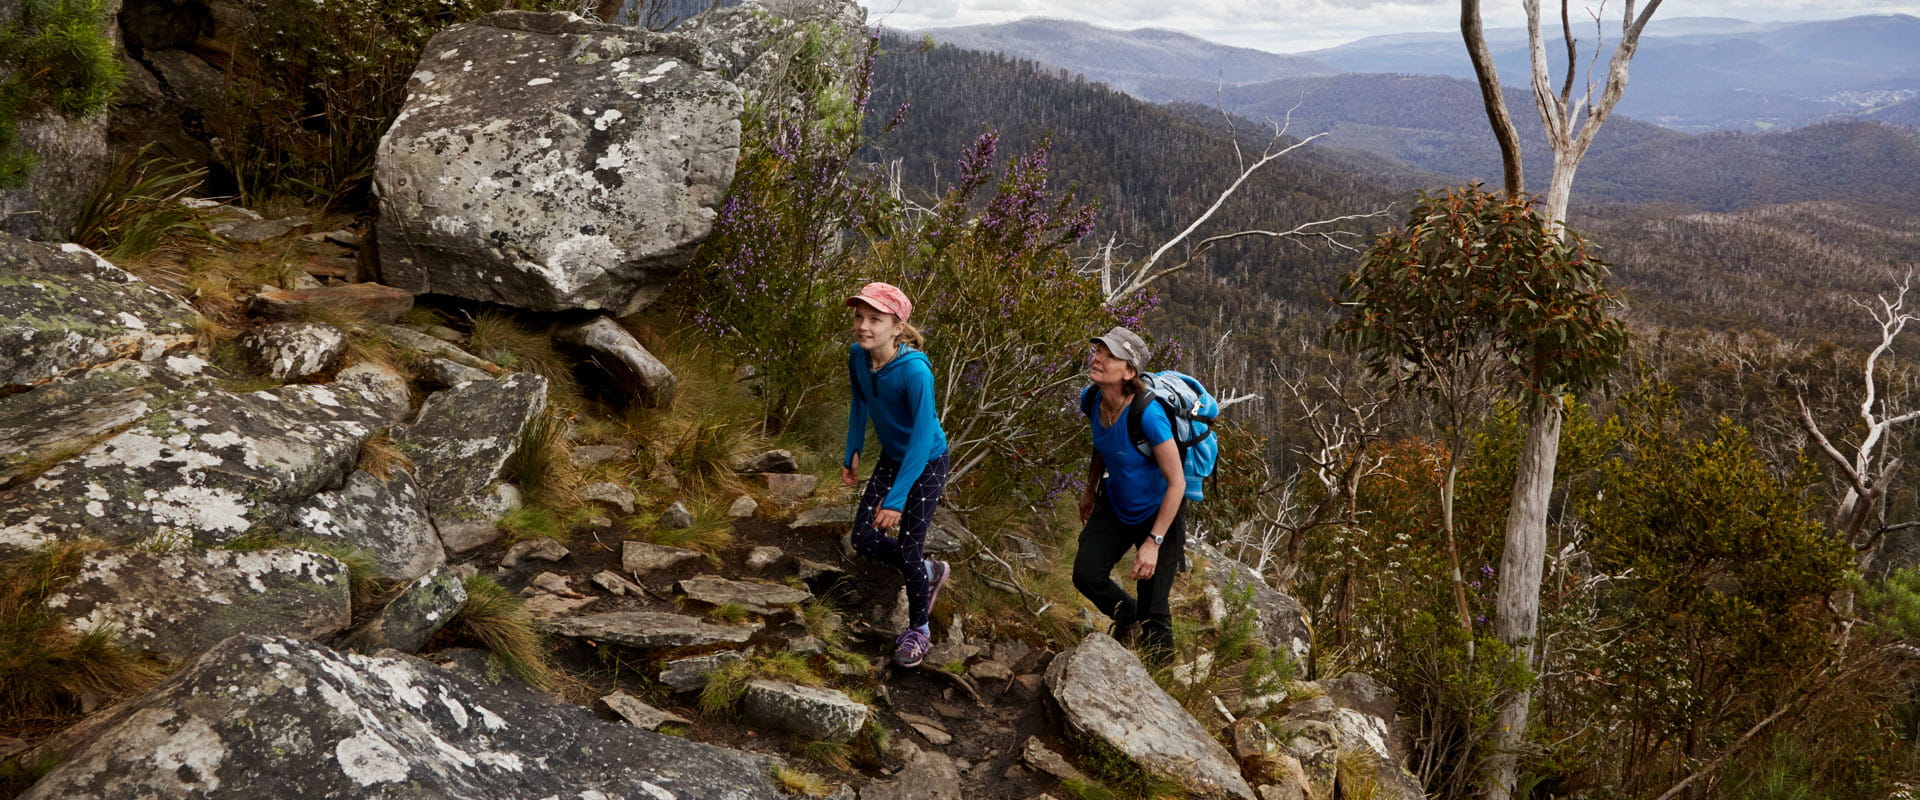 A woman and young girl hike up a rocky trail with a vast scenic mountain view stretching out into the distance behind them.